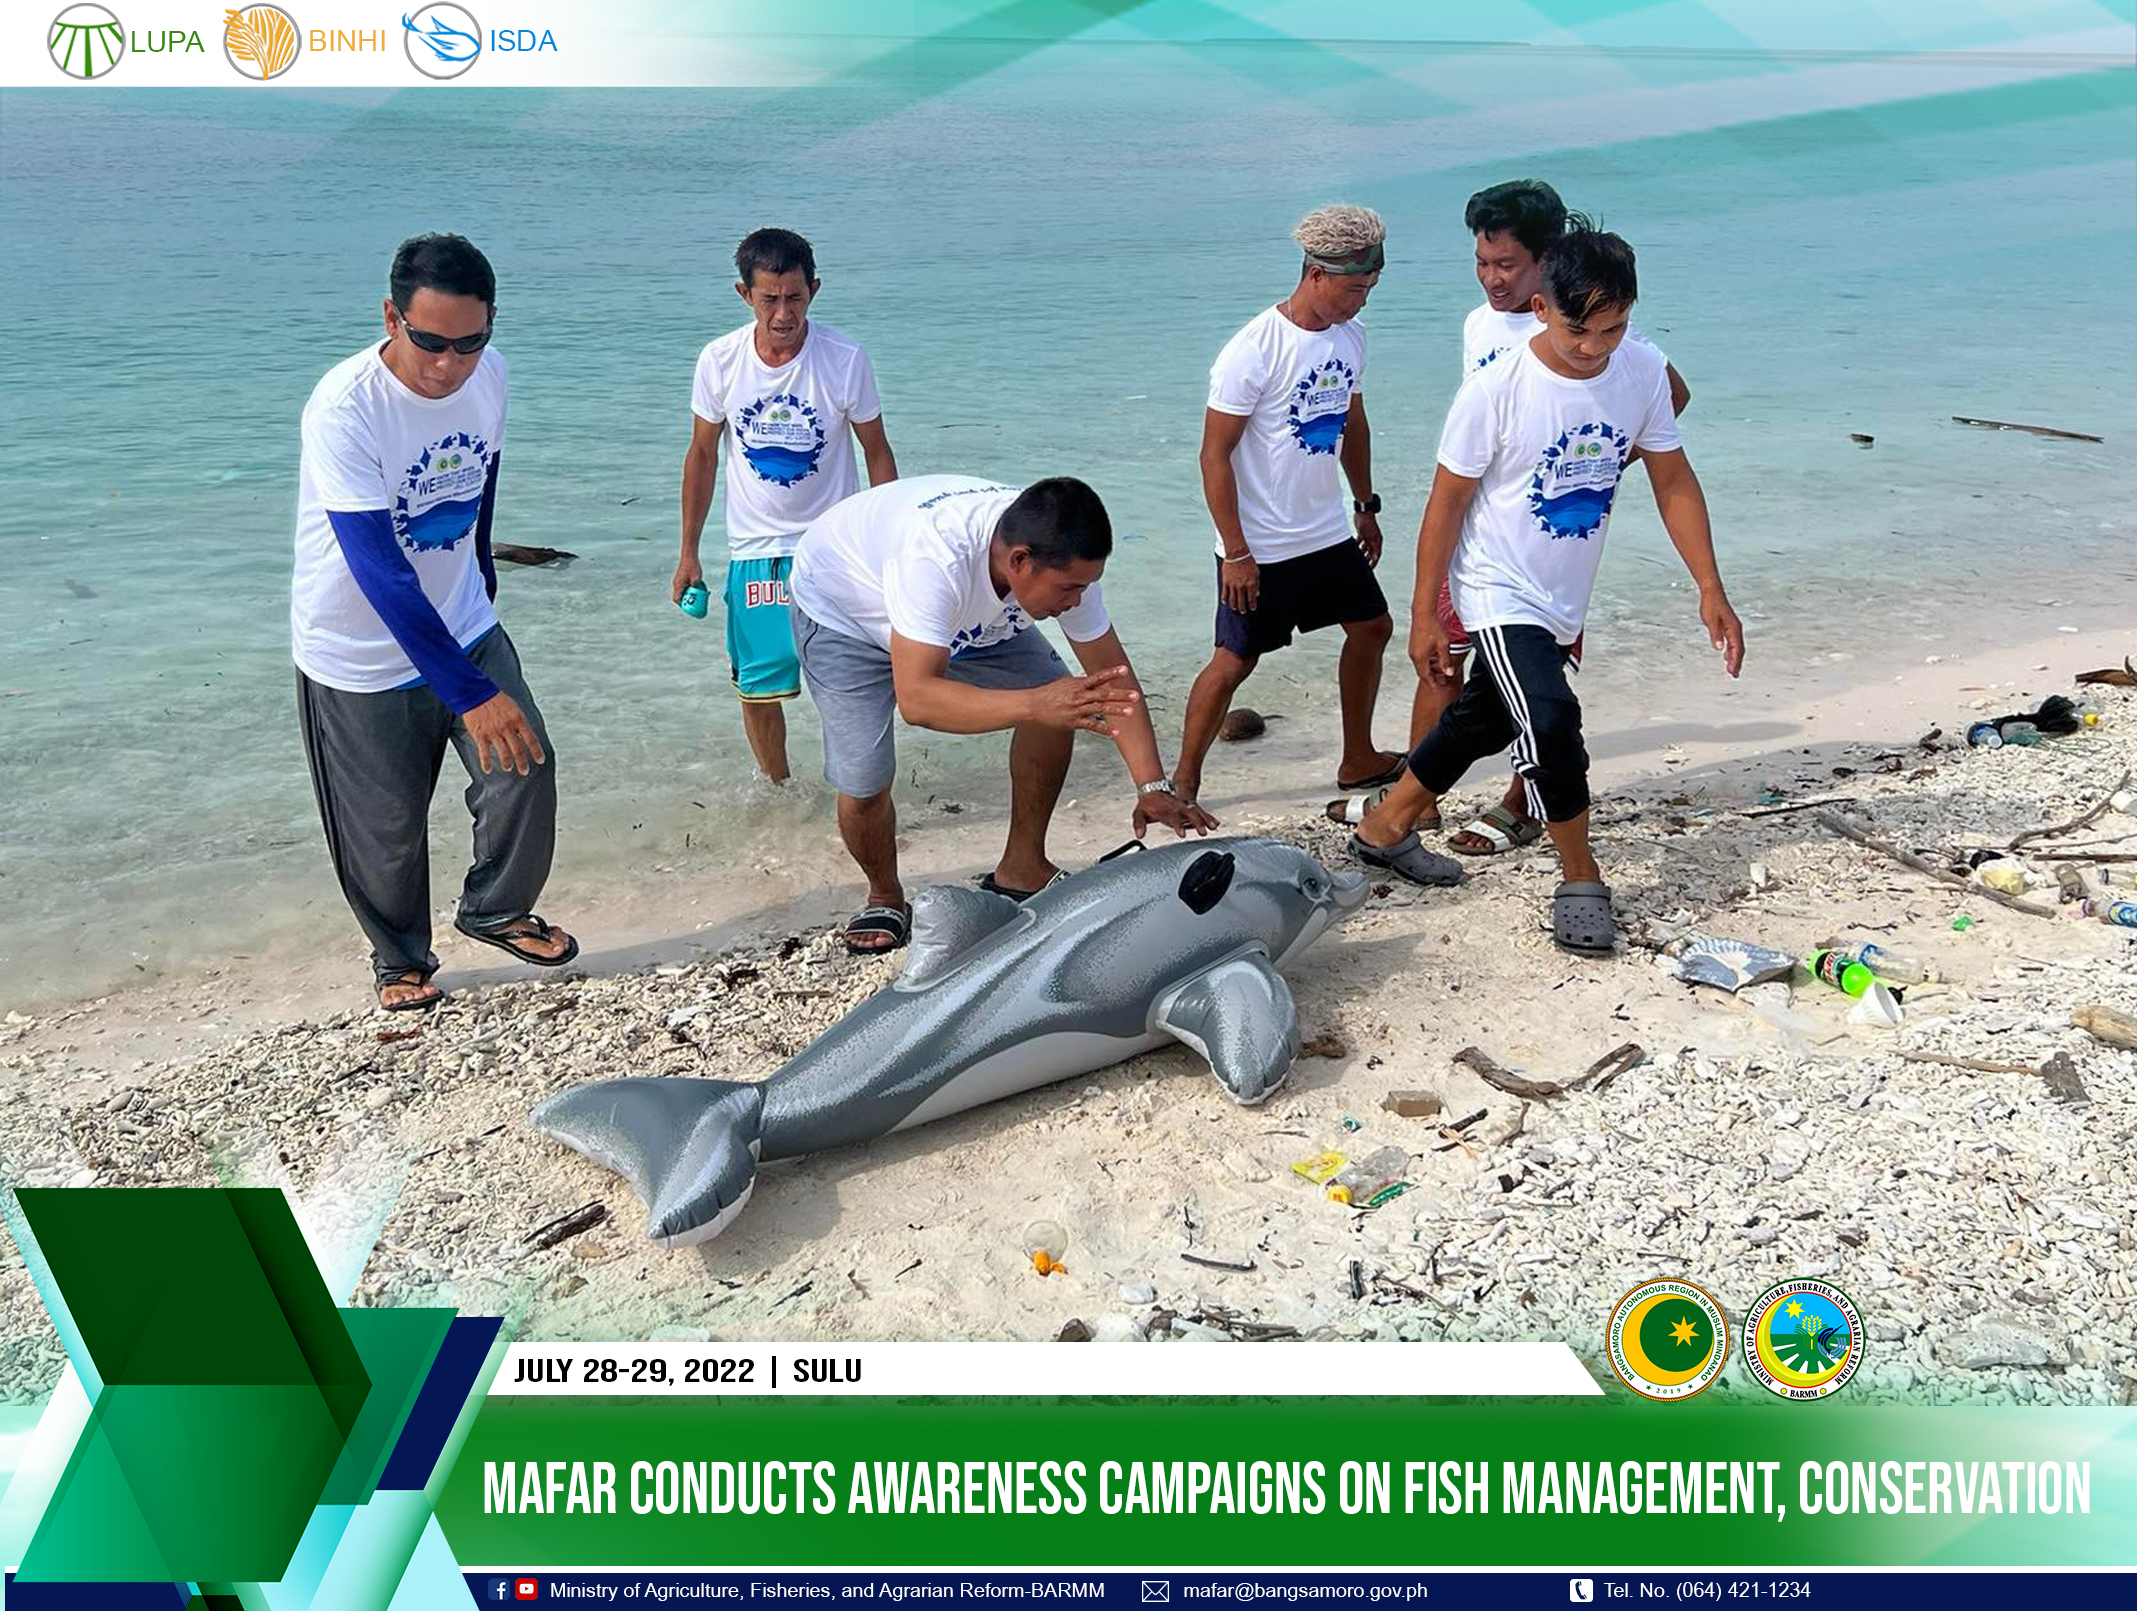 MAFAR conducts awareness campaigns on fish management, conservation